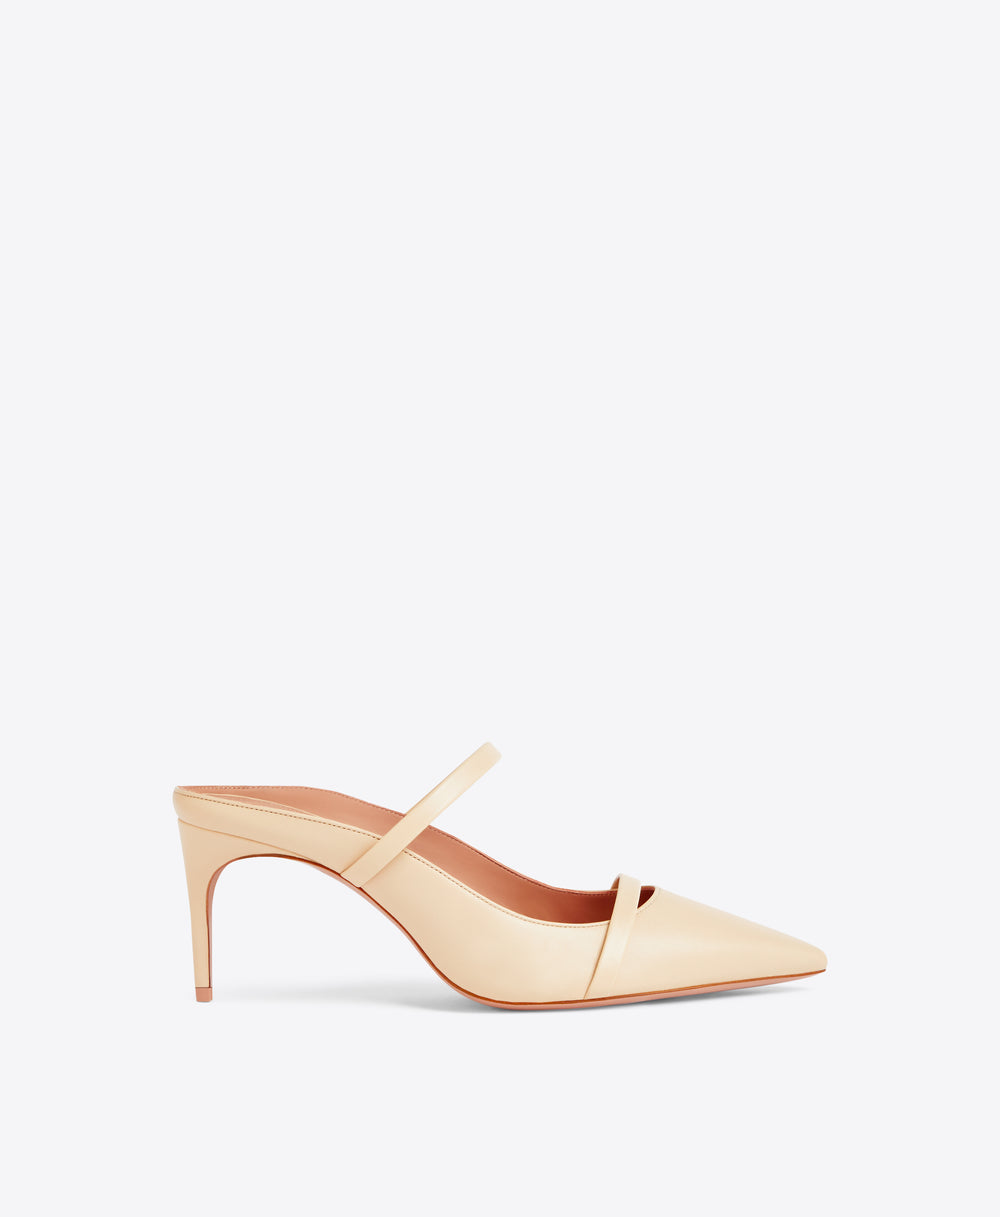 Aurora 70 Butter Leather Heeled Mule Malone Souliers